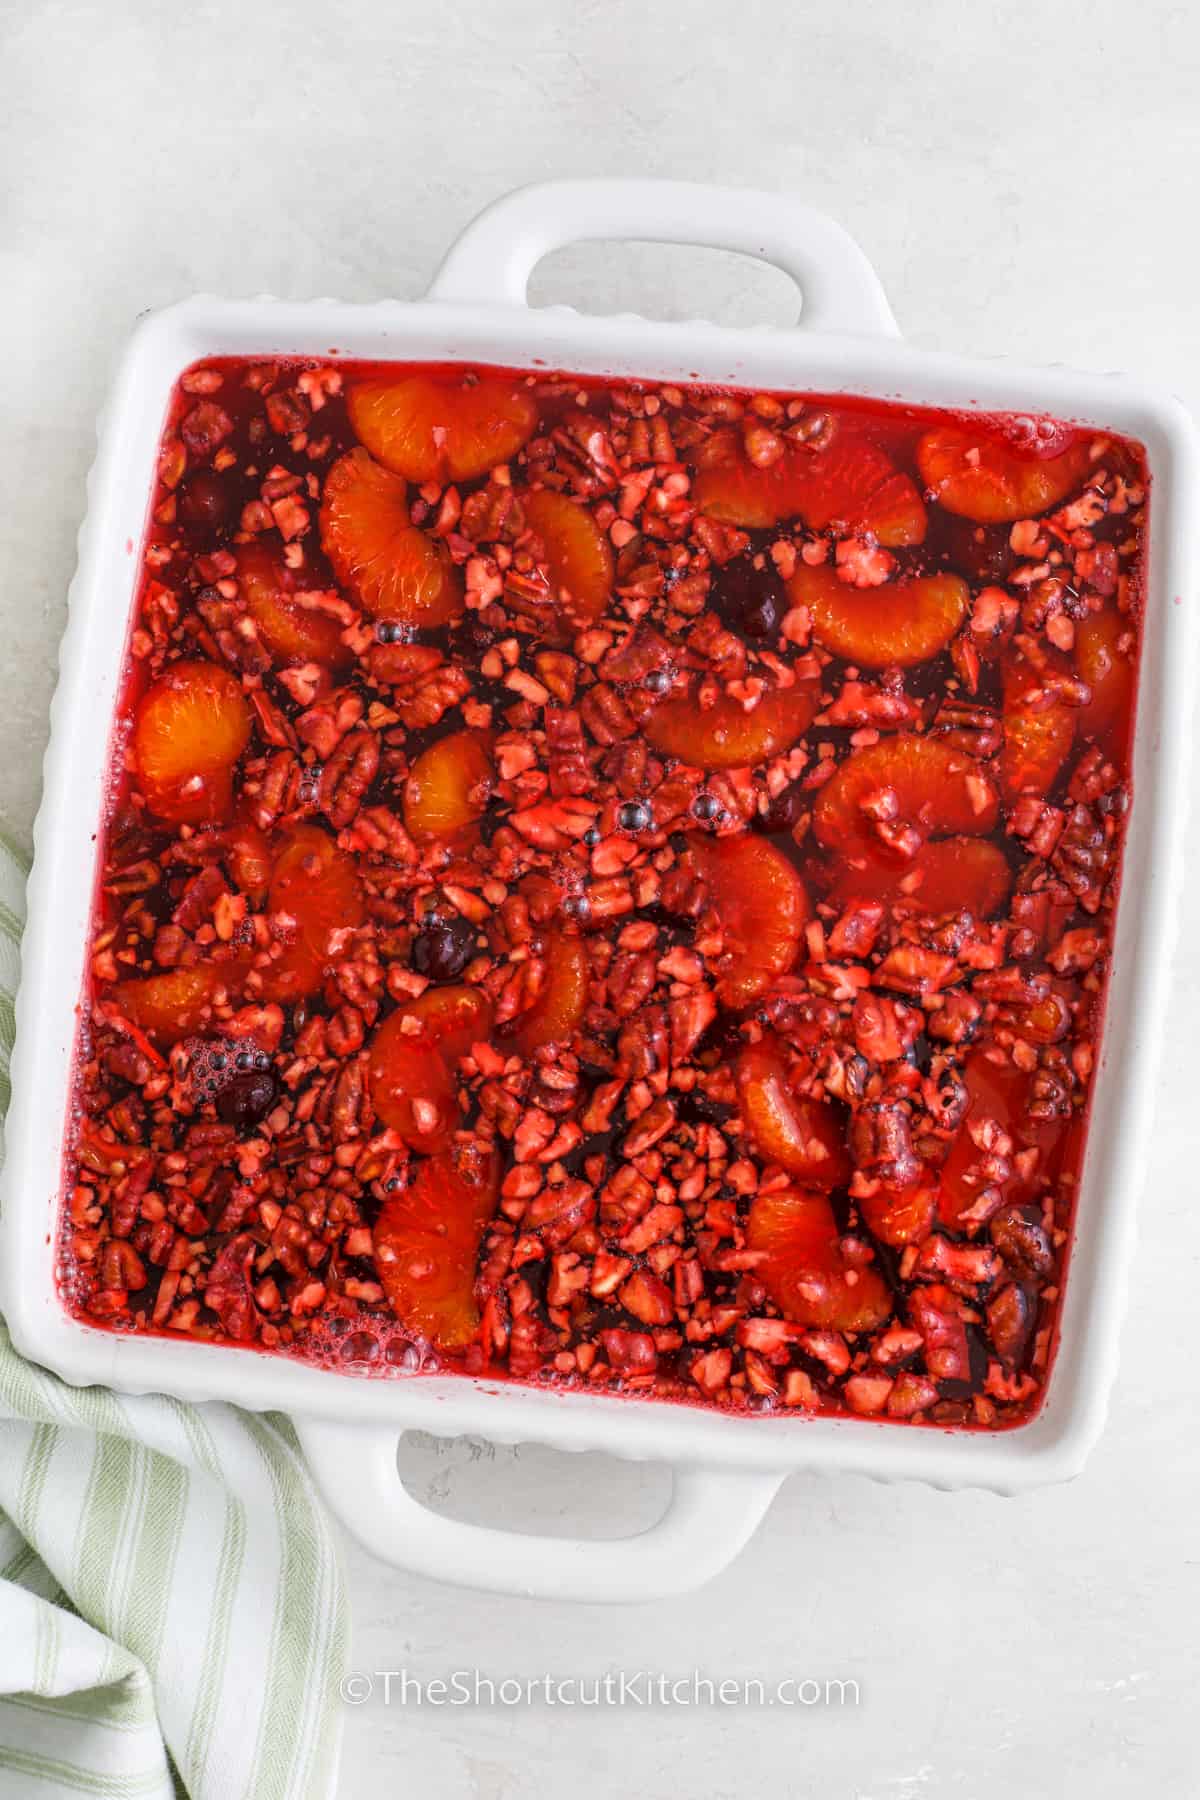 cranberry jello salad ingredients in a white casserole dish